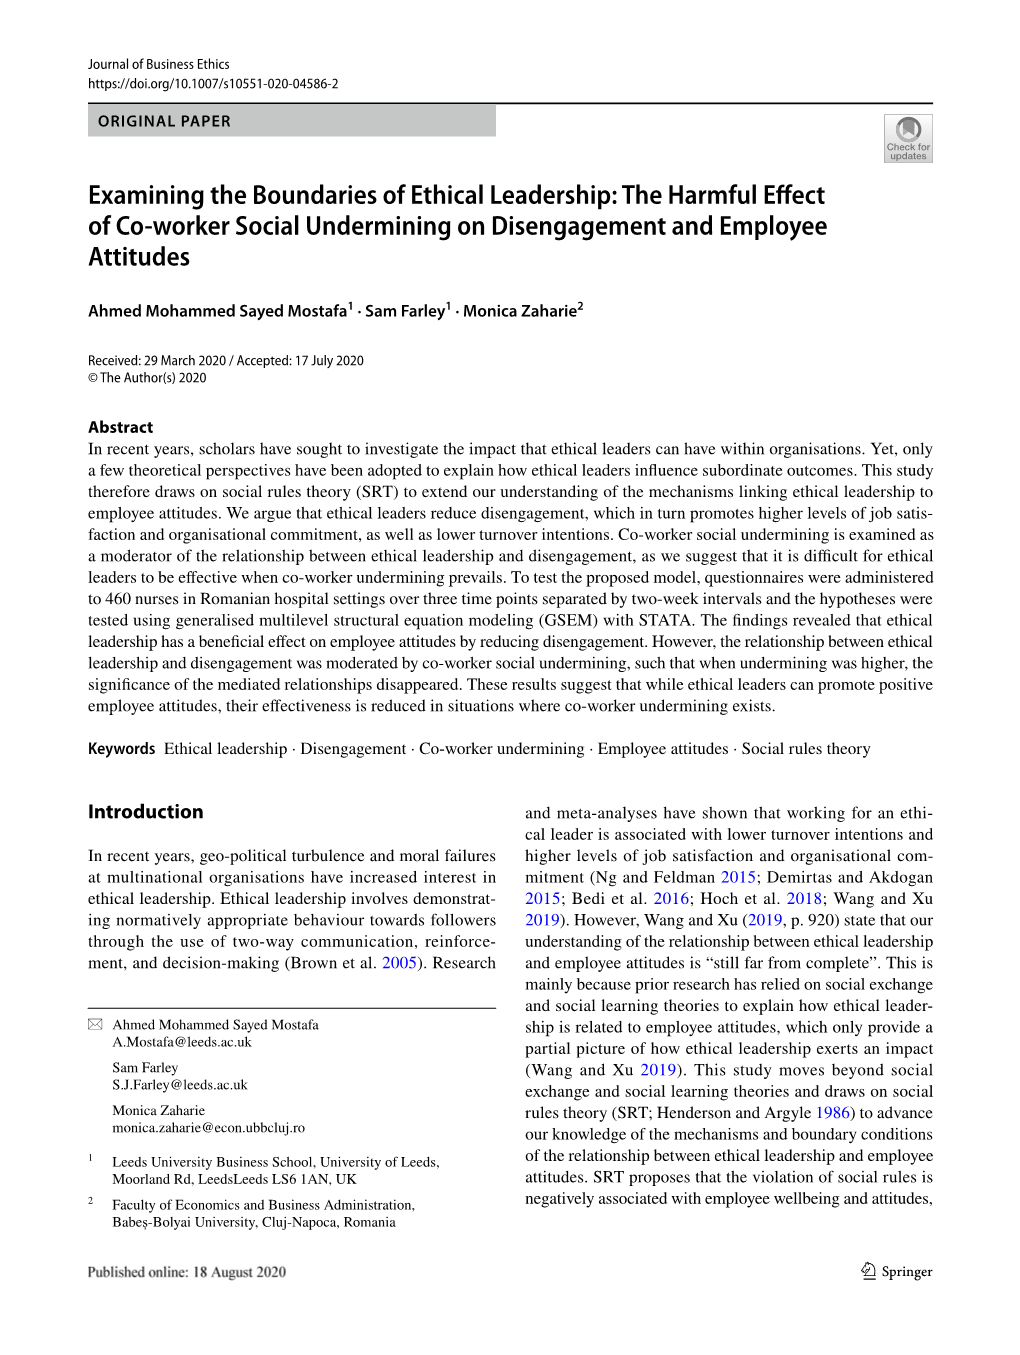 Examining the Boundaries of Ethical Leadership: the Harmful Effect Of